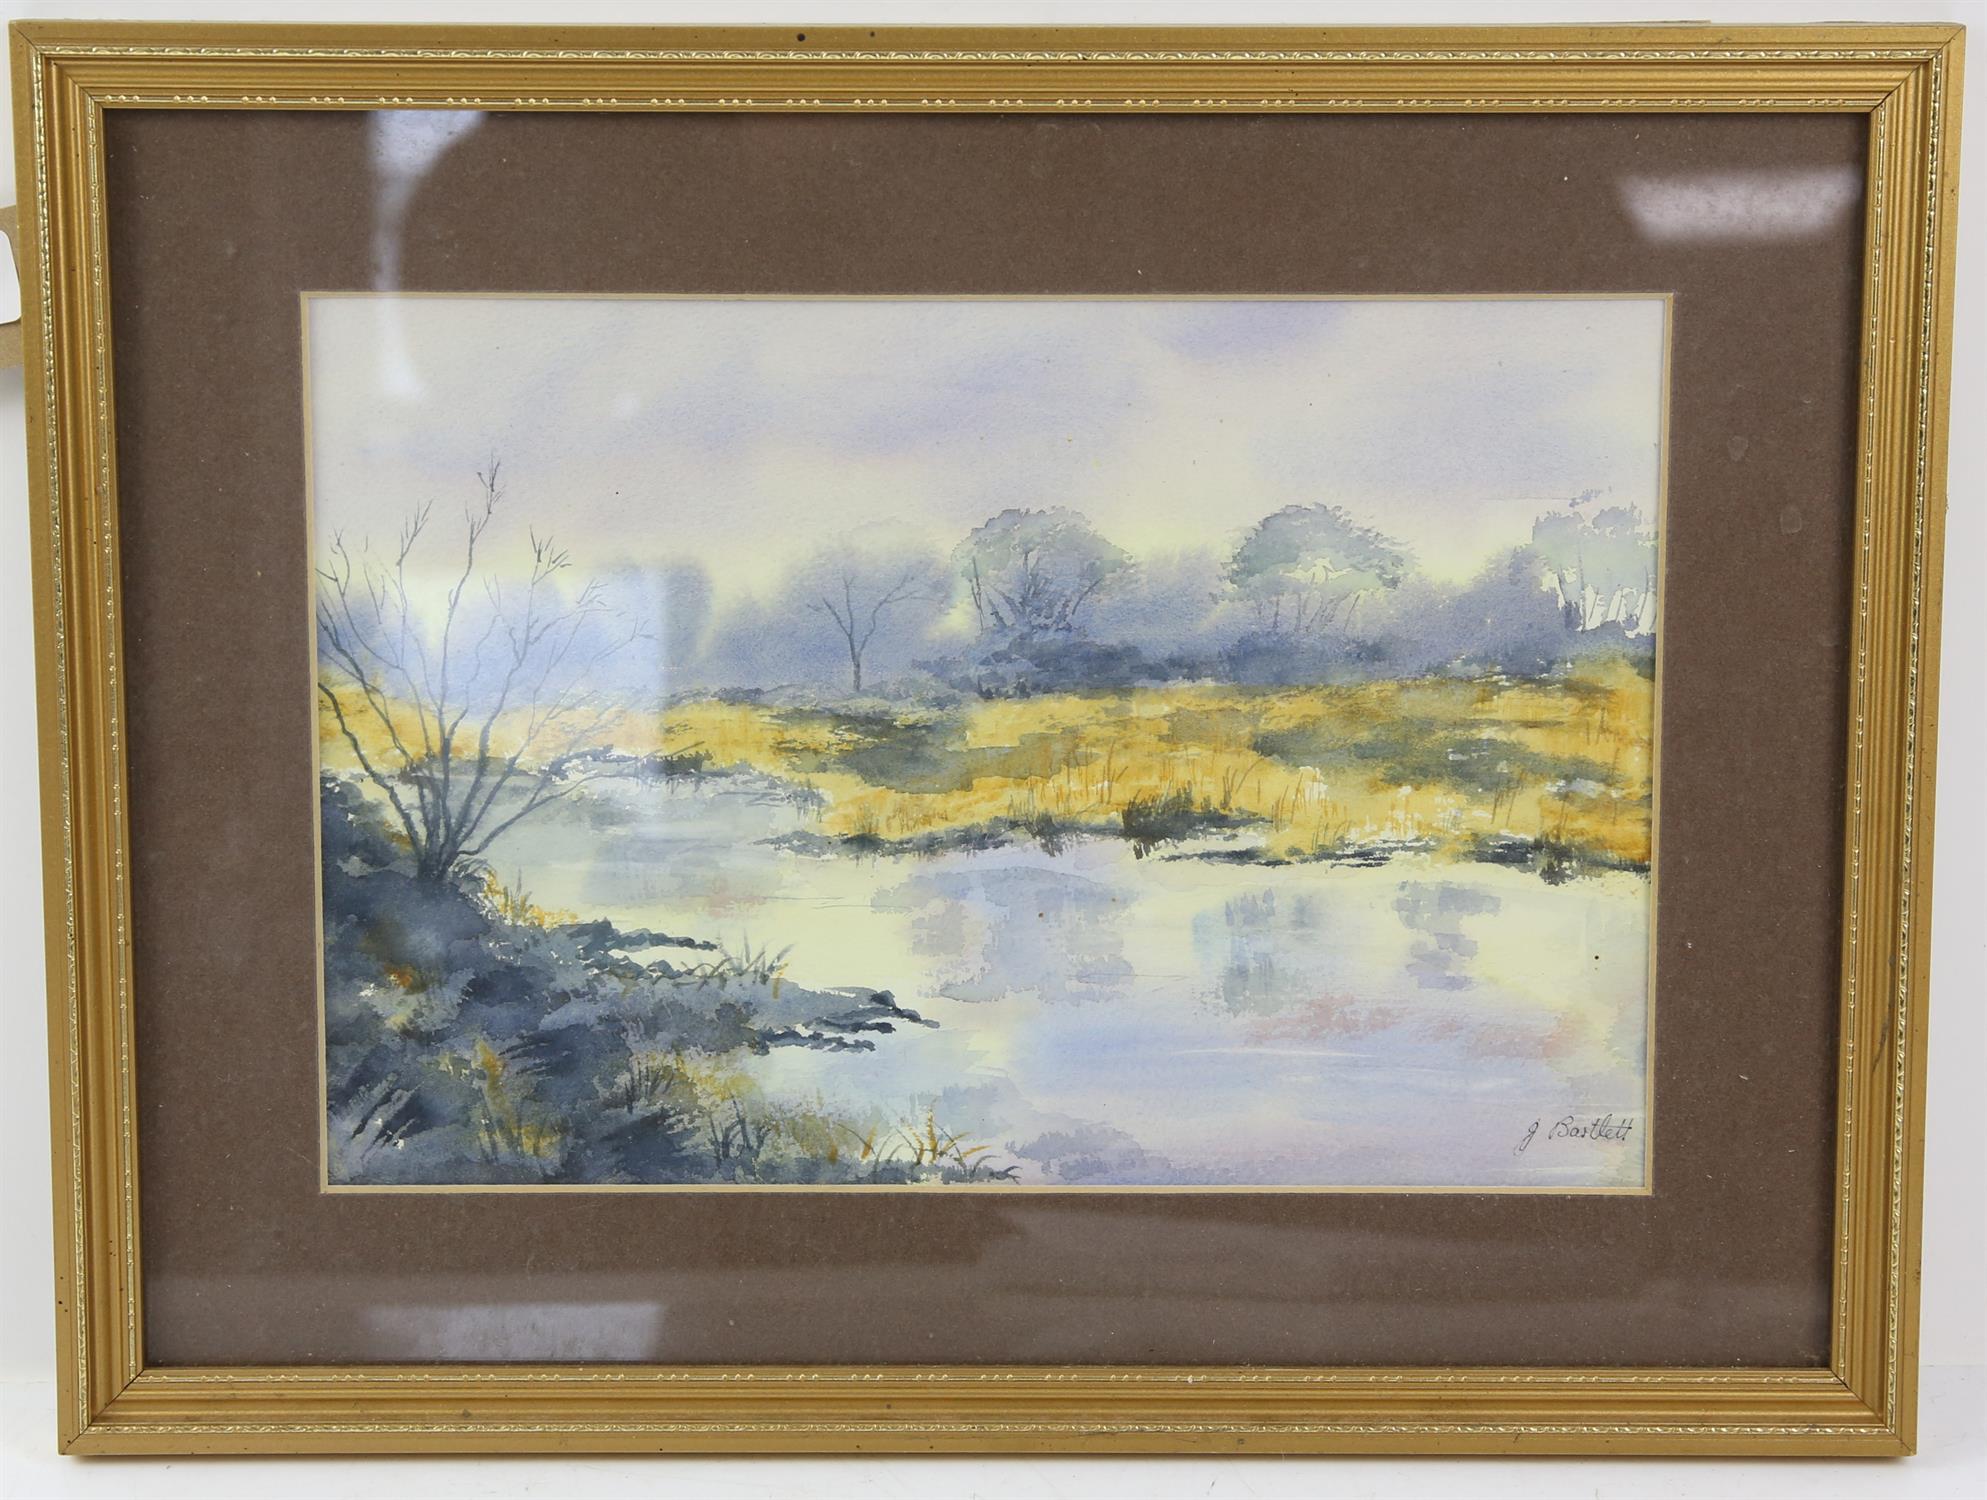 Geoff Bartlett (British), winter landscape. Watercolour. Signed lower right. Framed and glazed.